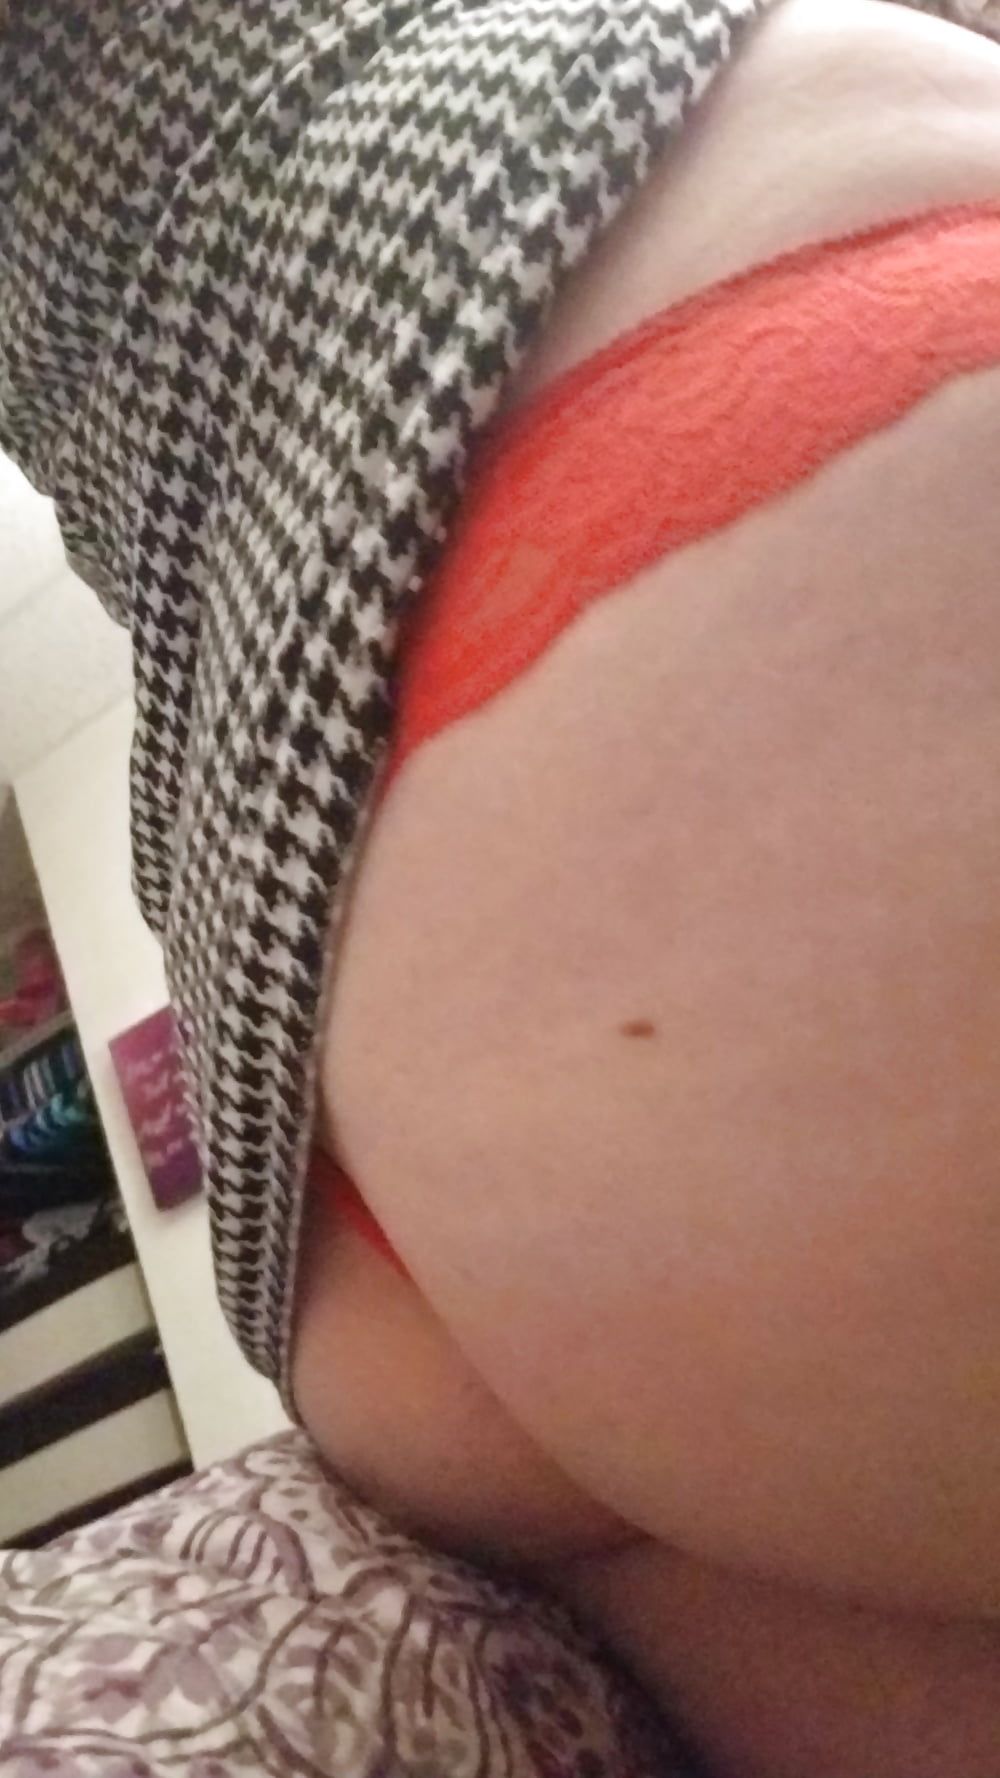 Wife's ass in thong... special request for my 1st & favorite #5